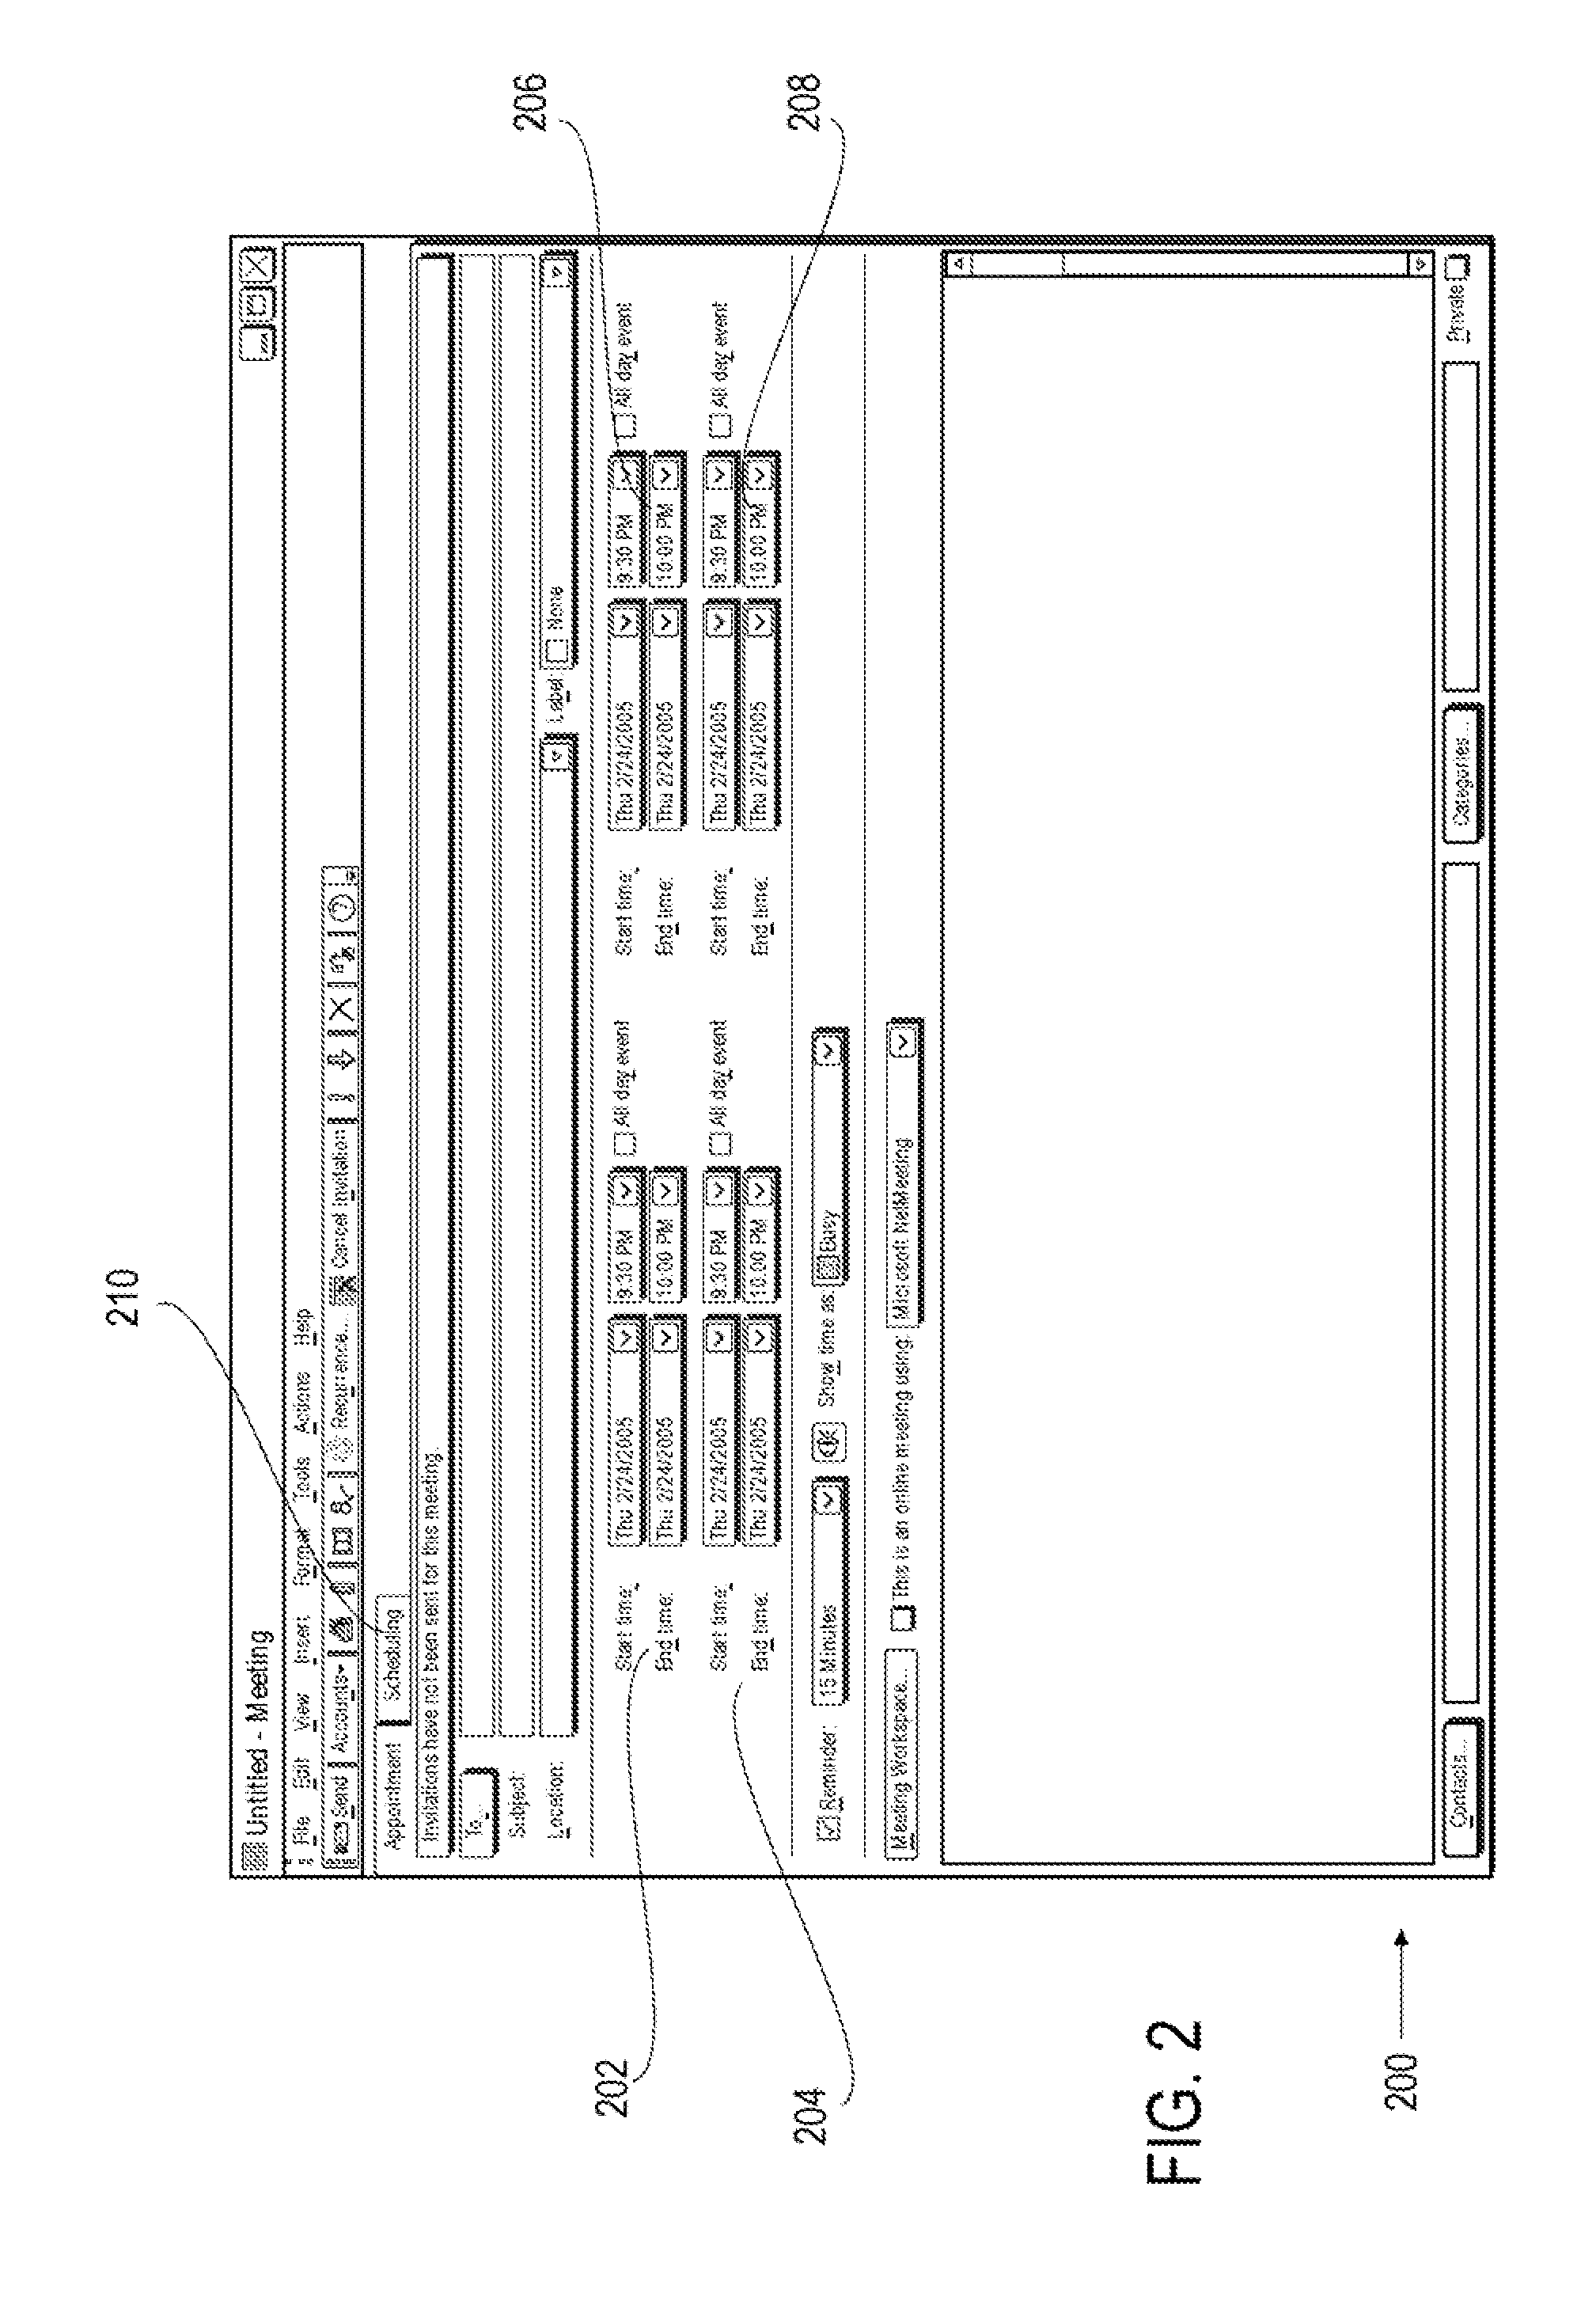 Method and user interface for computer-assisted schedule coordination